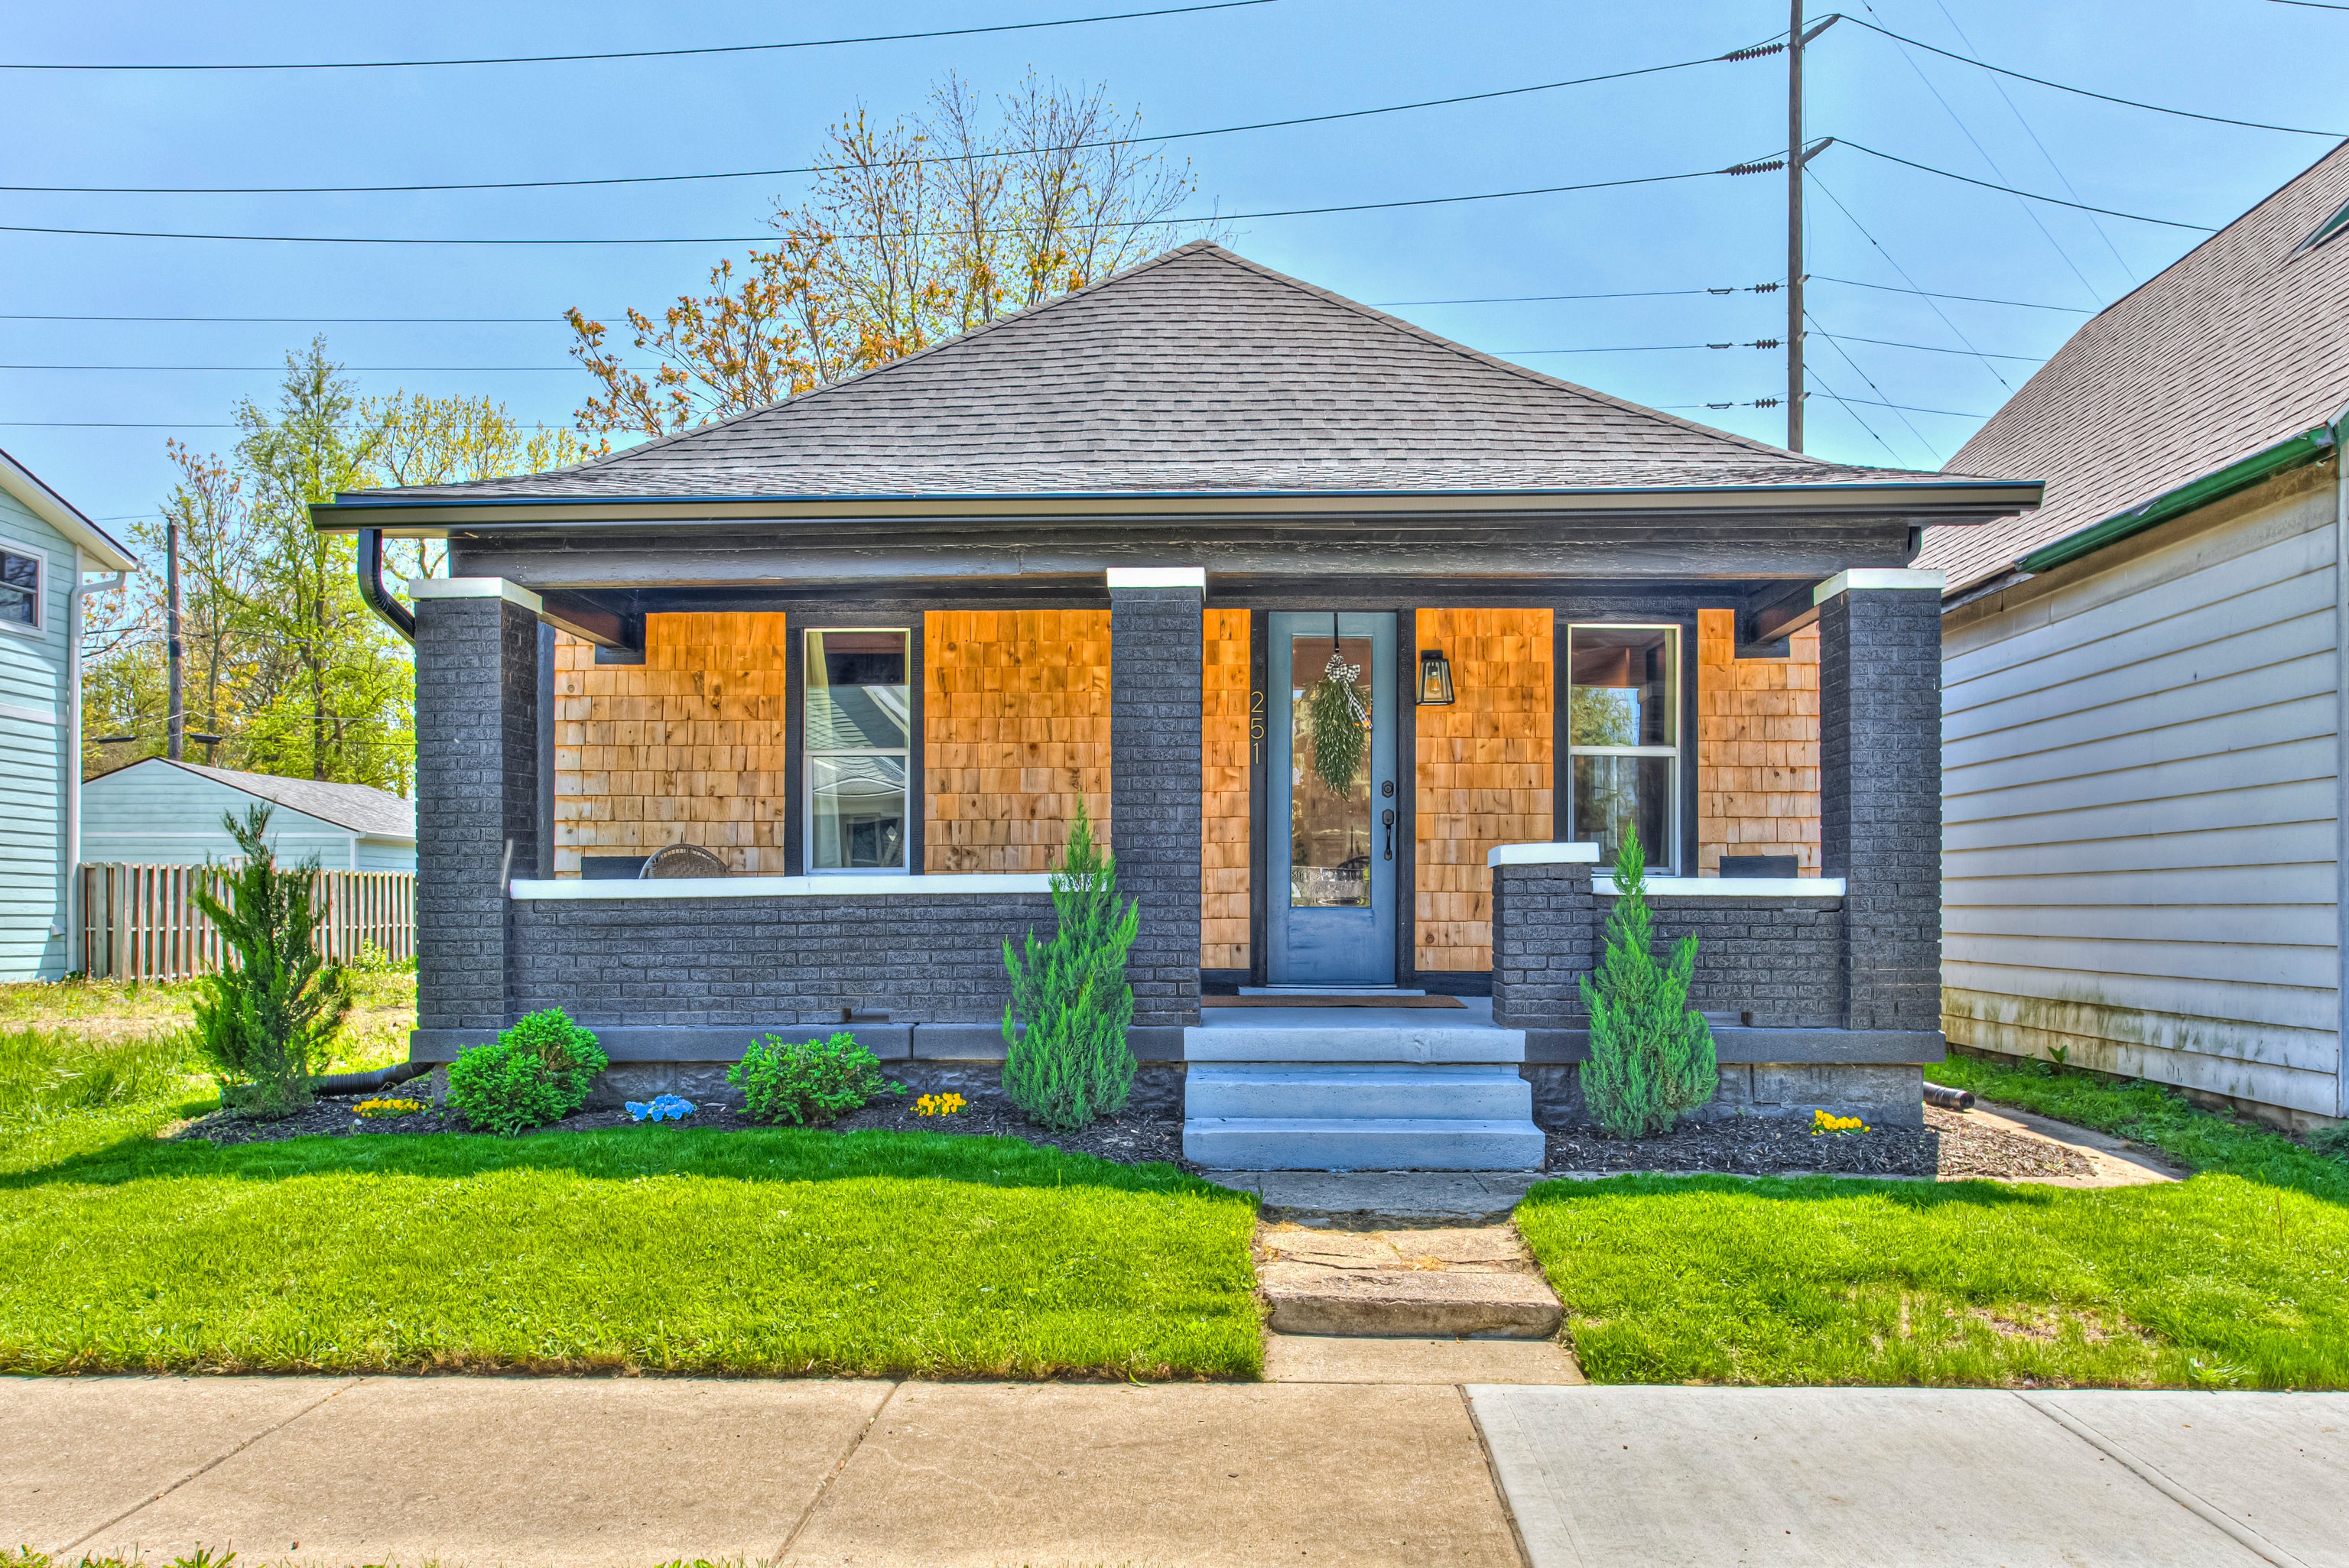 Photo of 251 E Caven Street Indianapolis, IN 46225